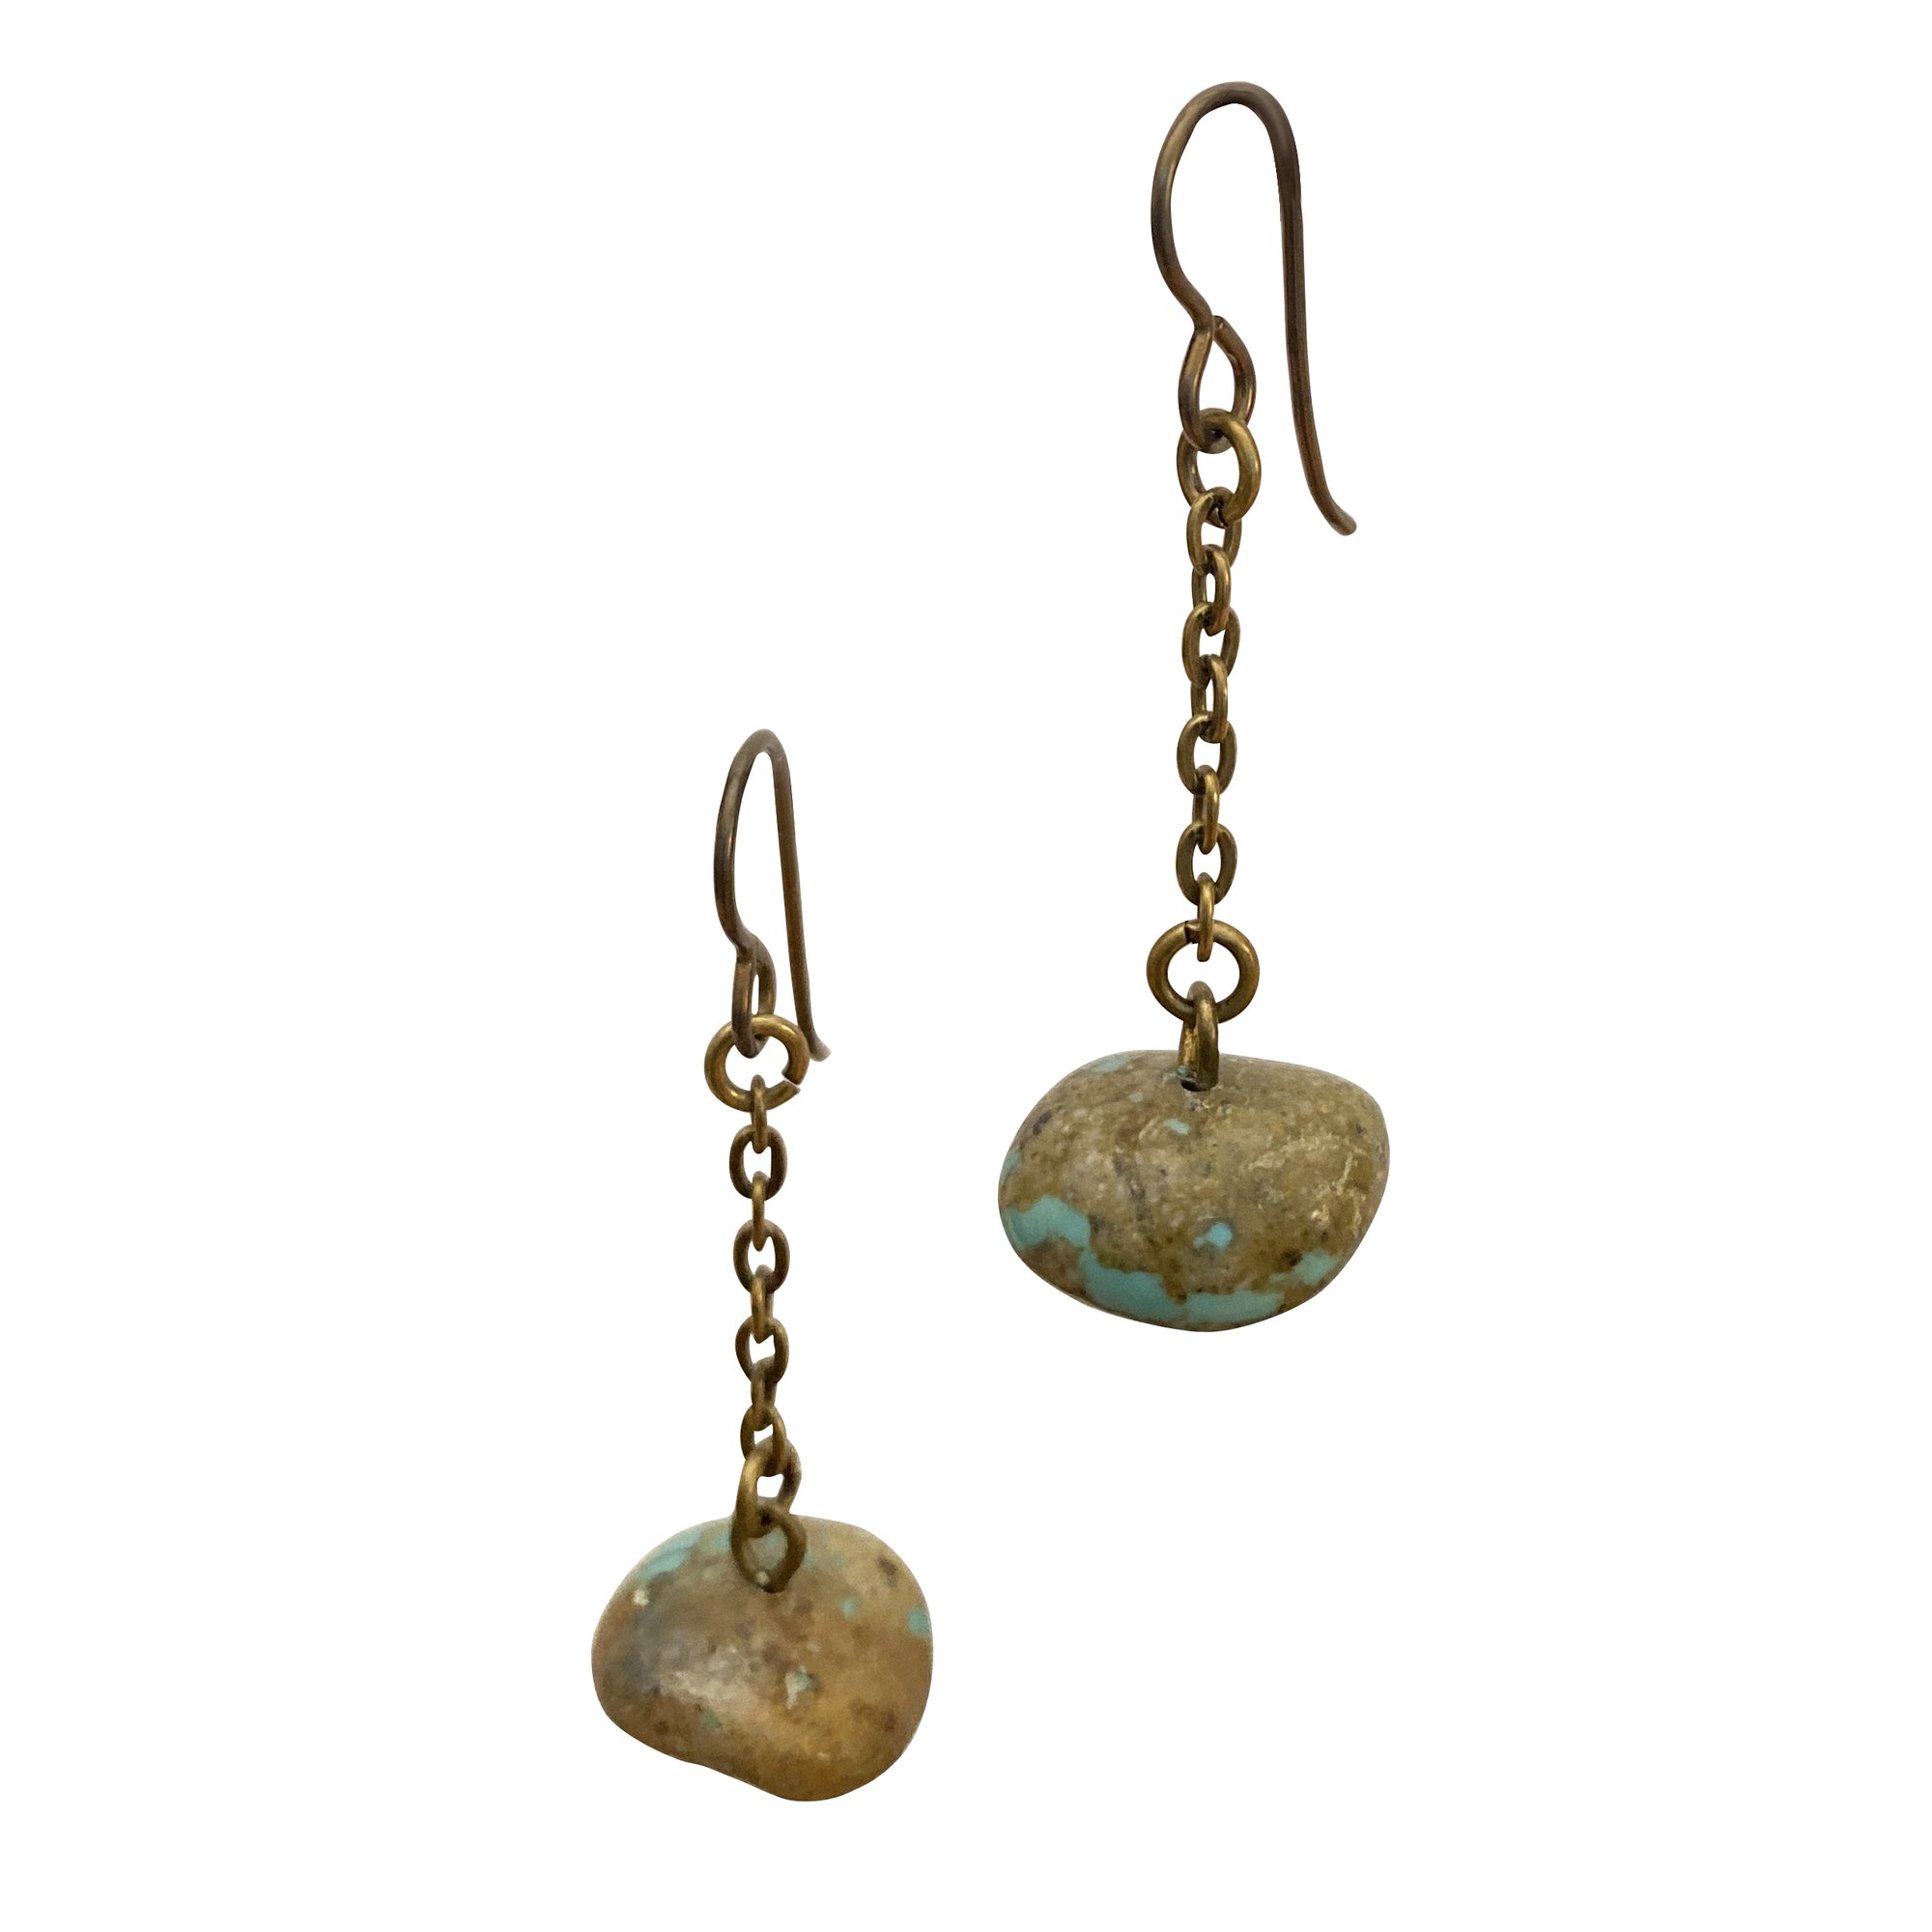 Anna Turquoise Brass Chain Earrings with Niobium Ear Wires for Sensitive Ears